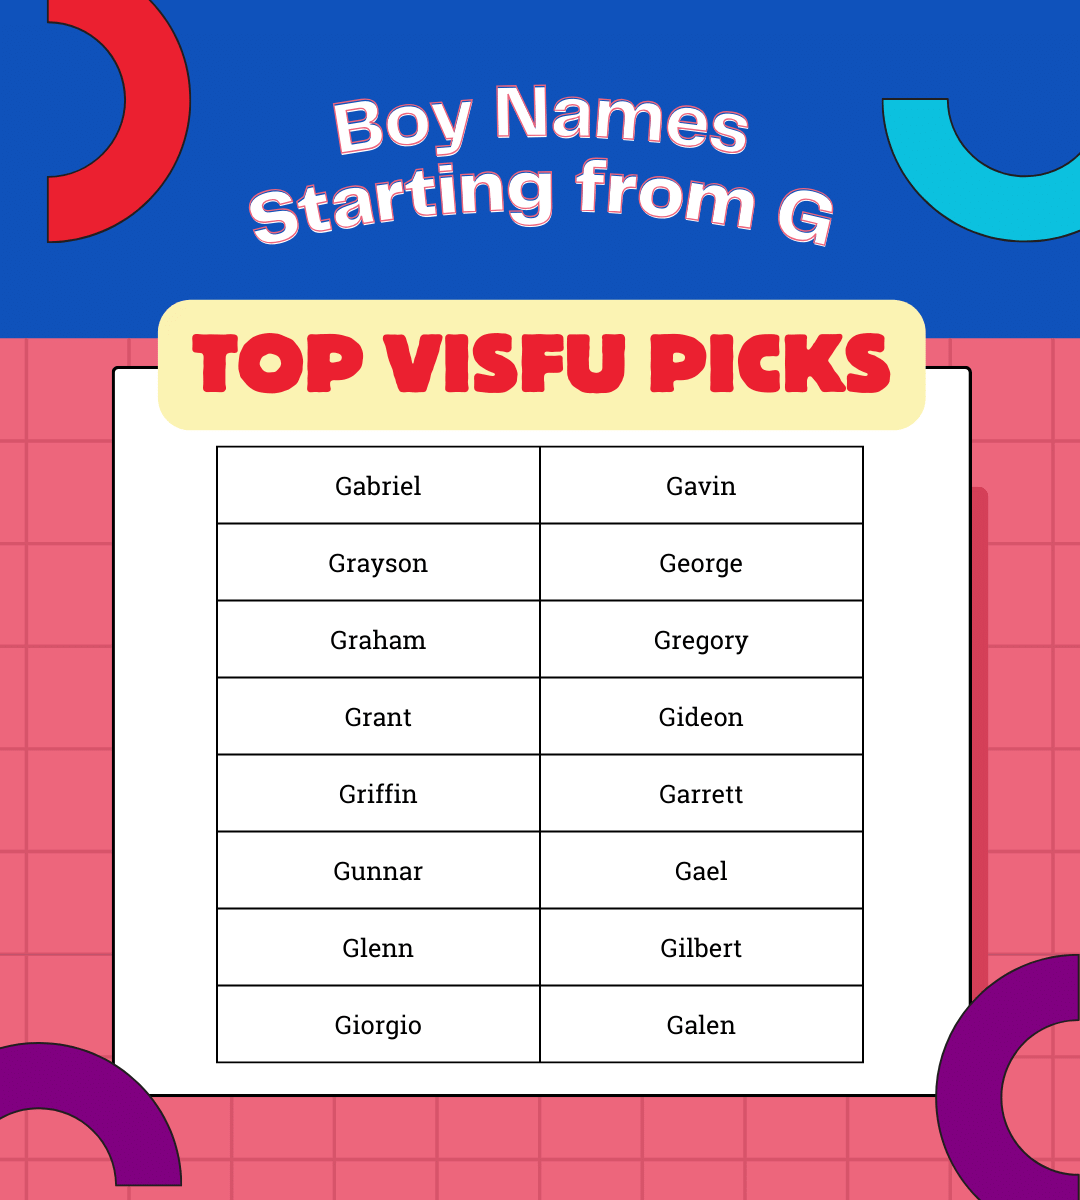 Boy names starting from G